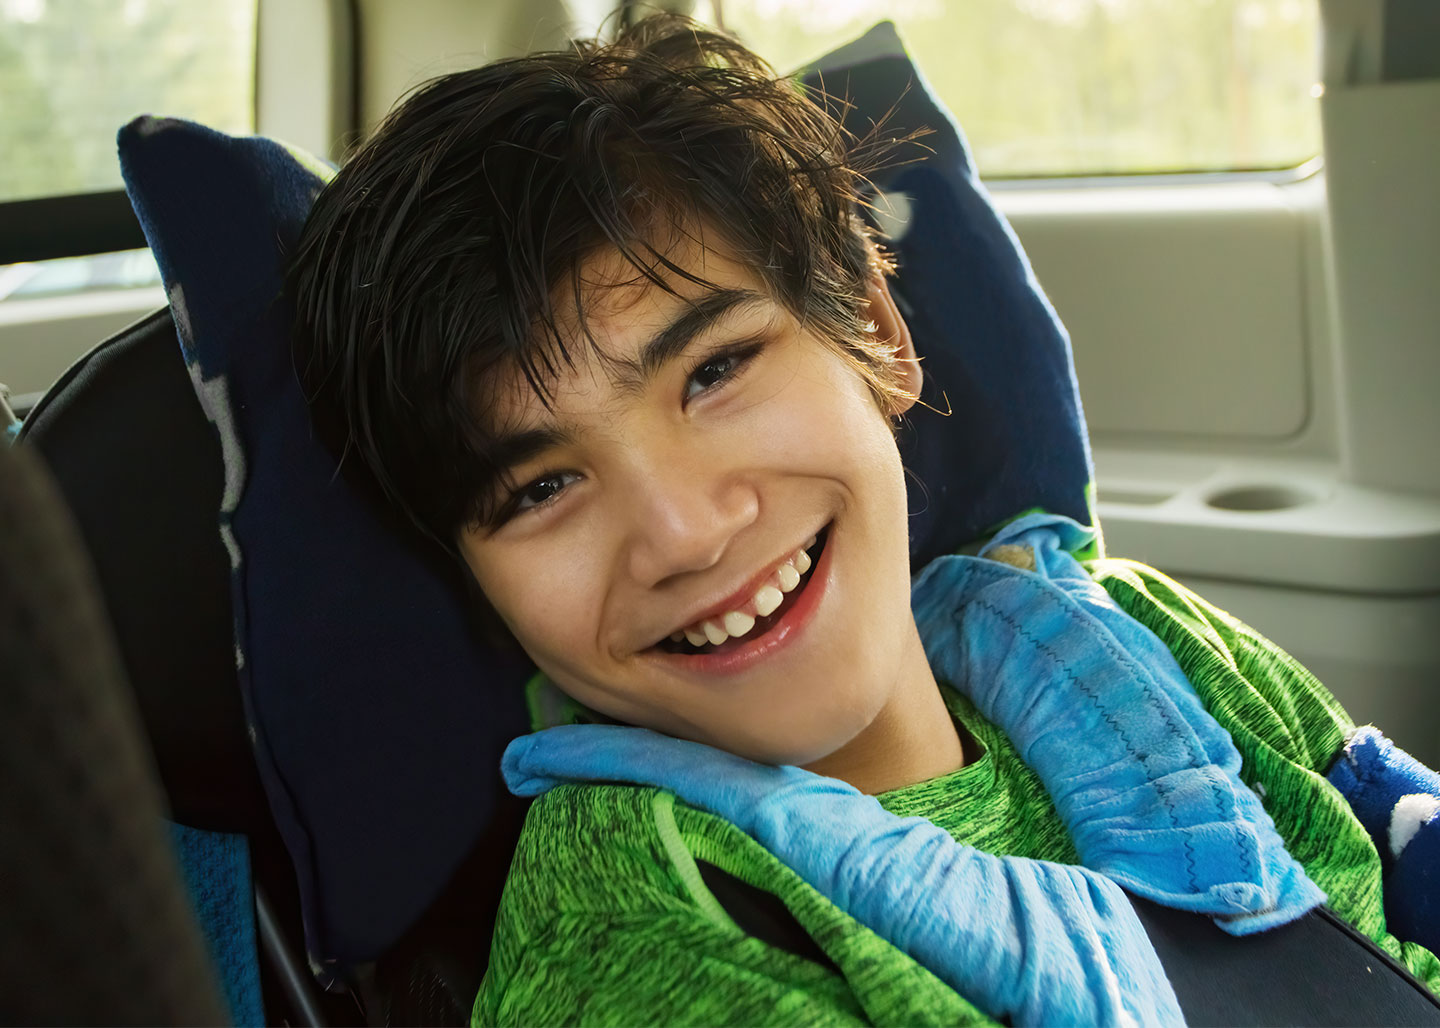 boy smiling at camera in the back of a car